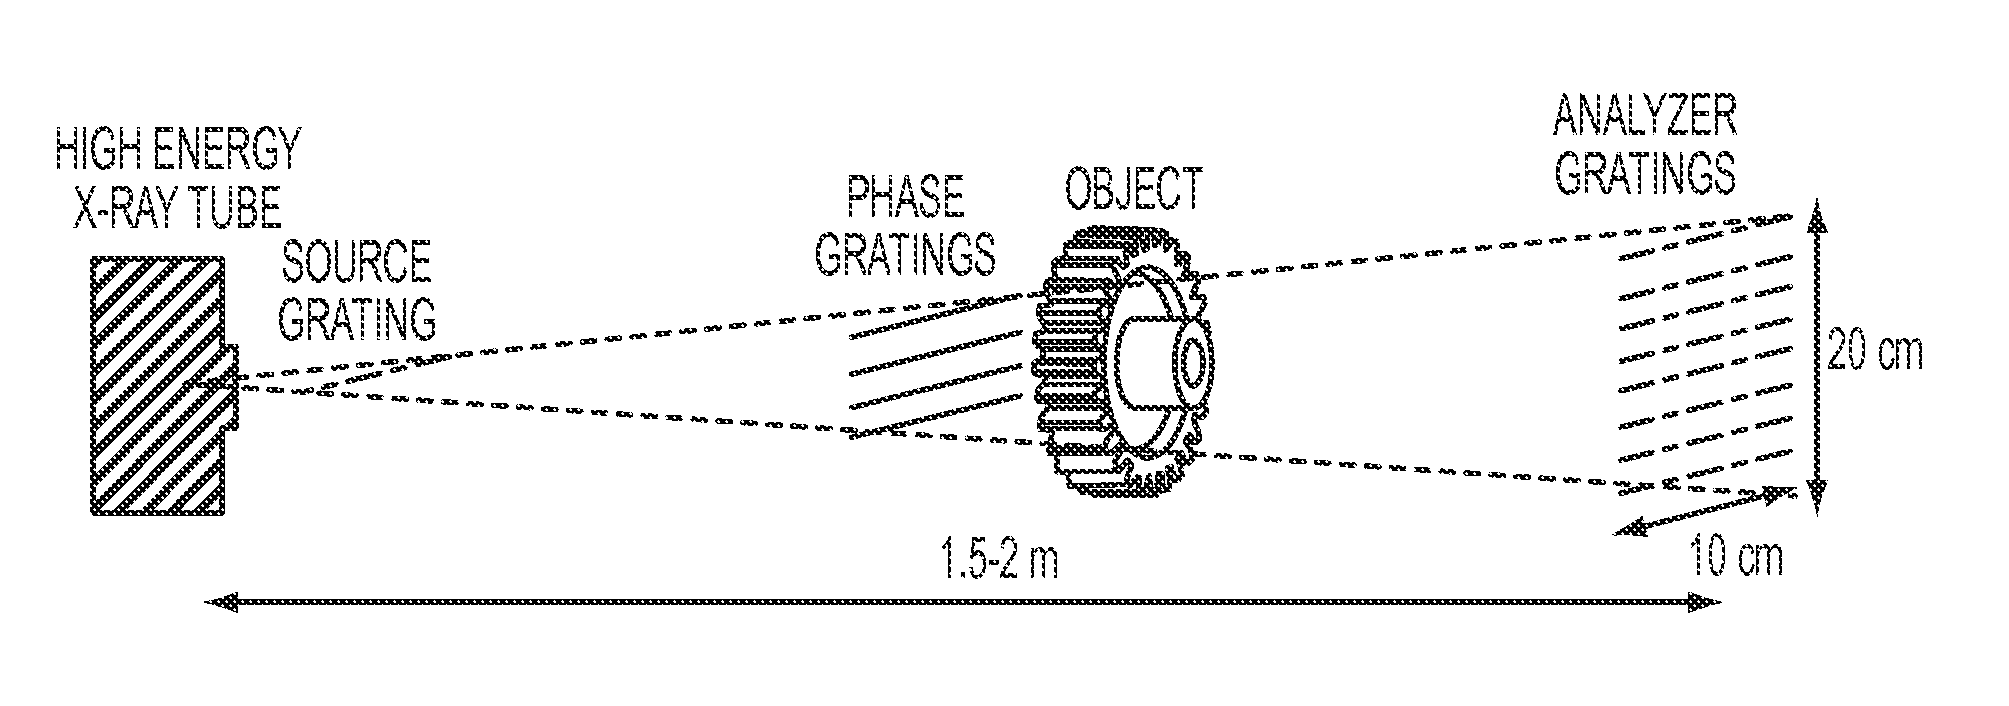 Differential phase contrast x-ray imaging system and components